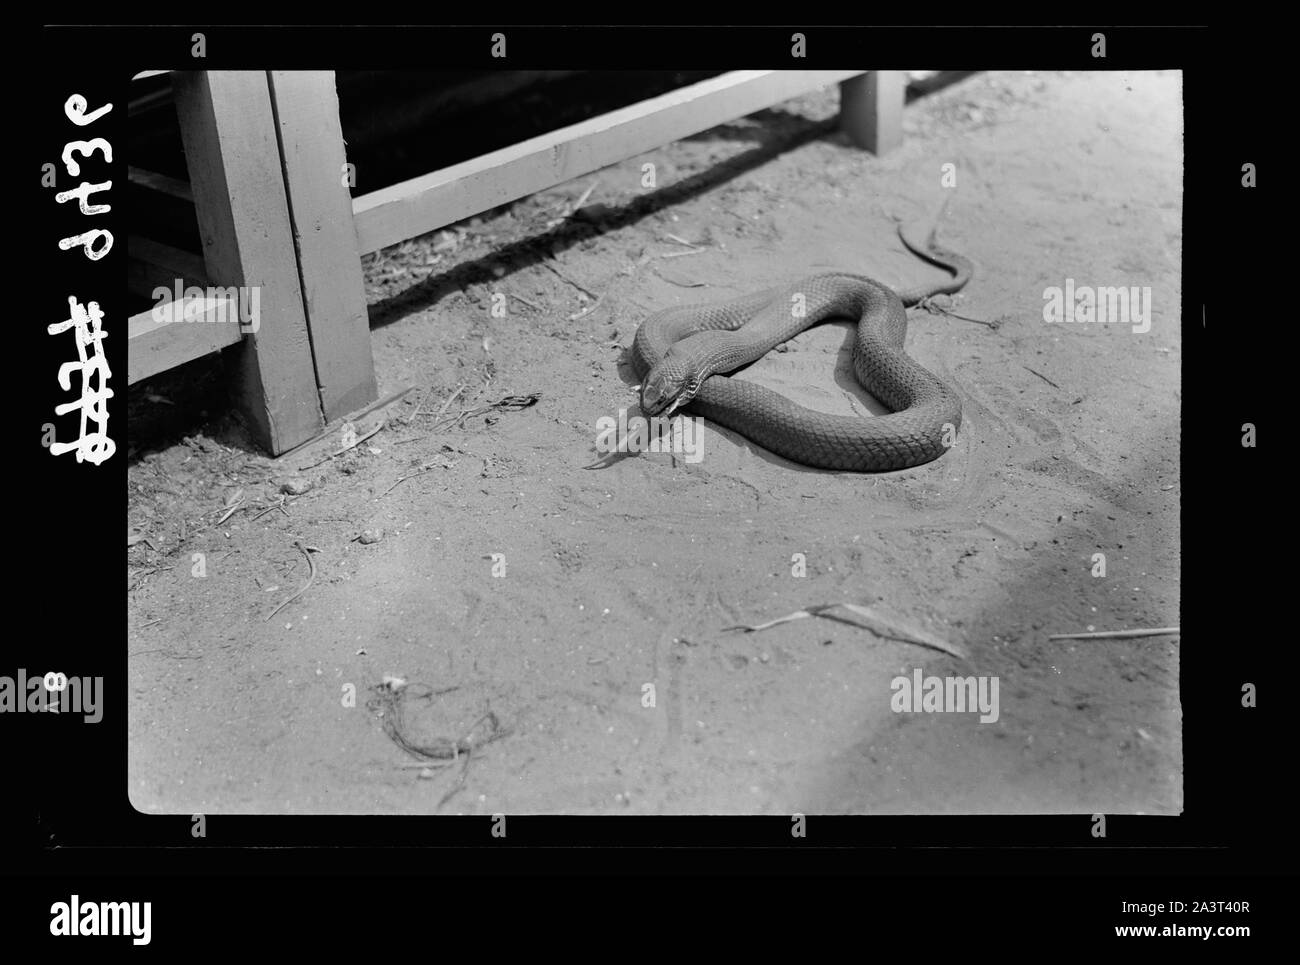 Tel Aviv Zoo. Rat, except for tail, disappeard in mouth of snake Stock Photo